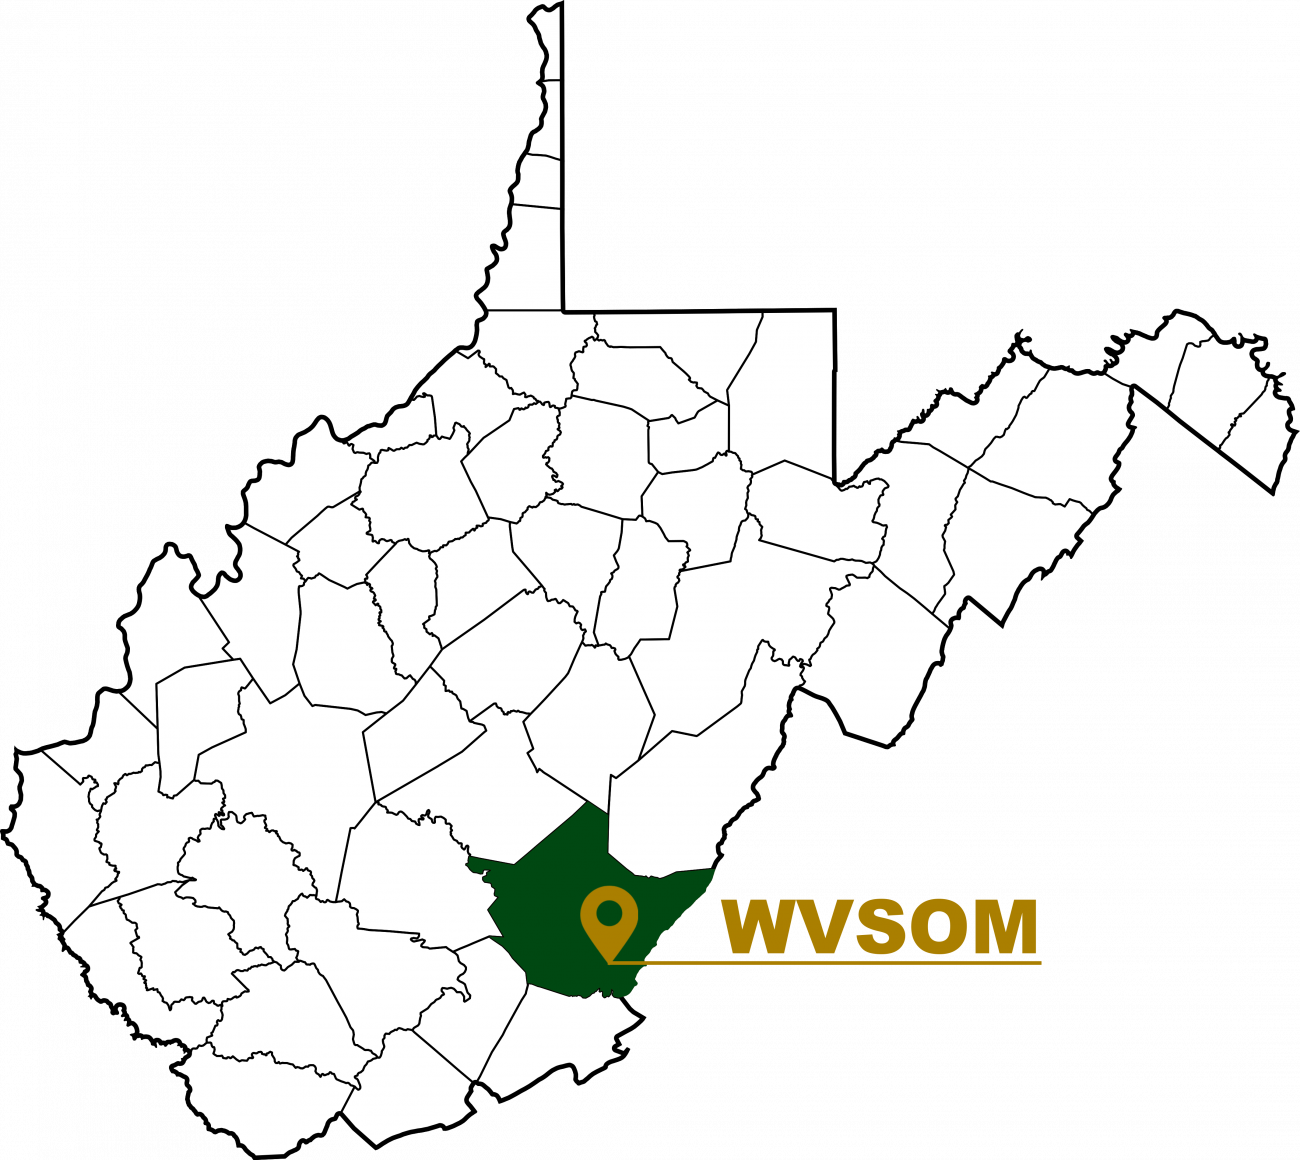 WV state map with WVSOM locater in Greenbrier County